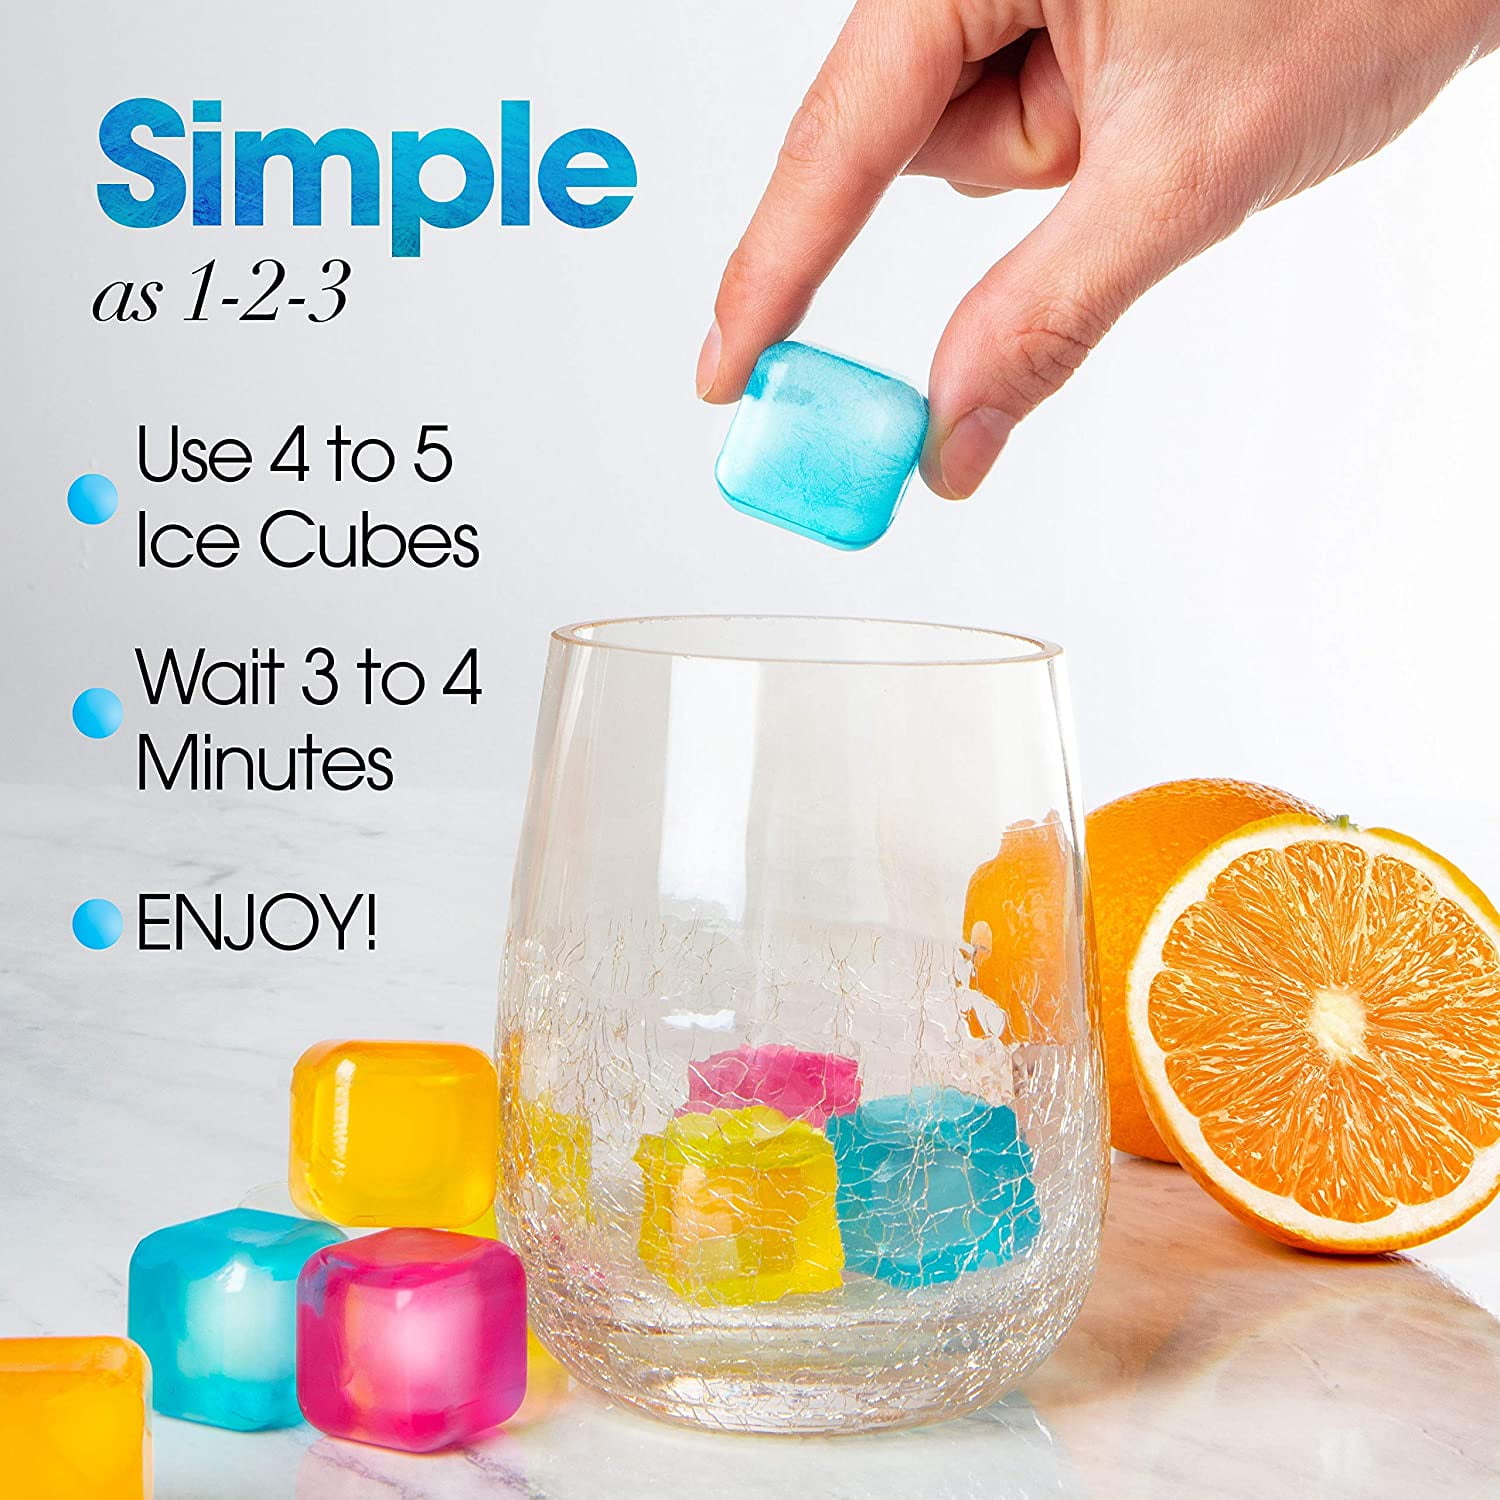 What are Reusable Ice Cubes and how to use them